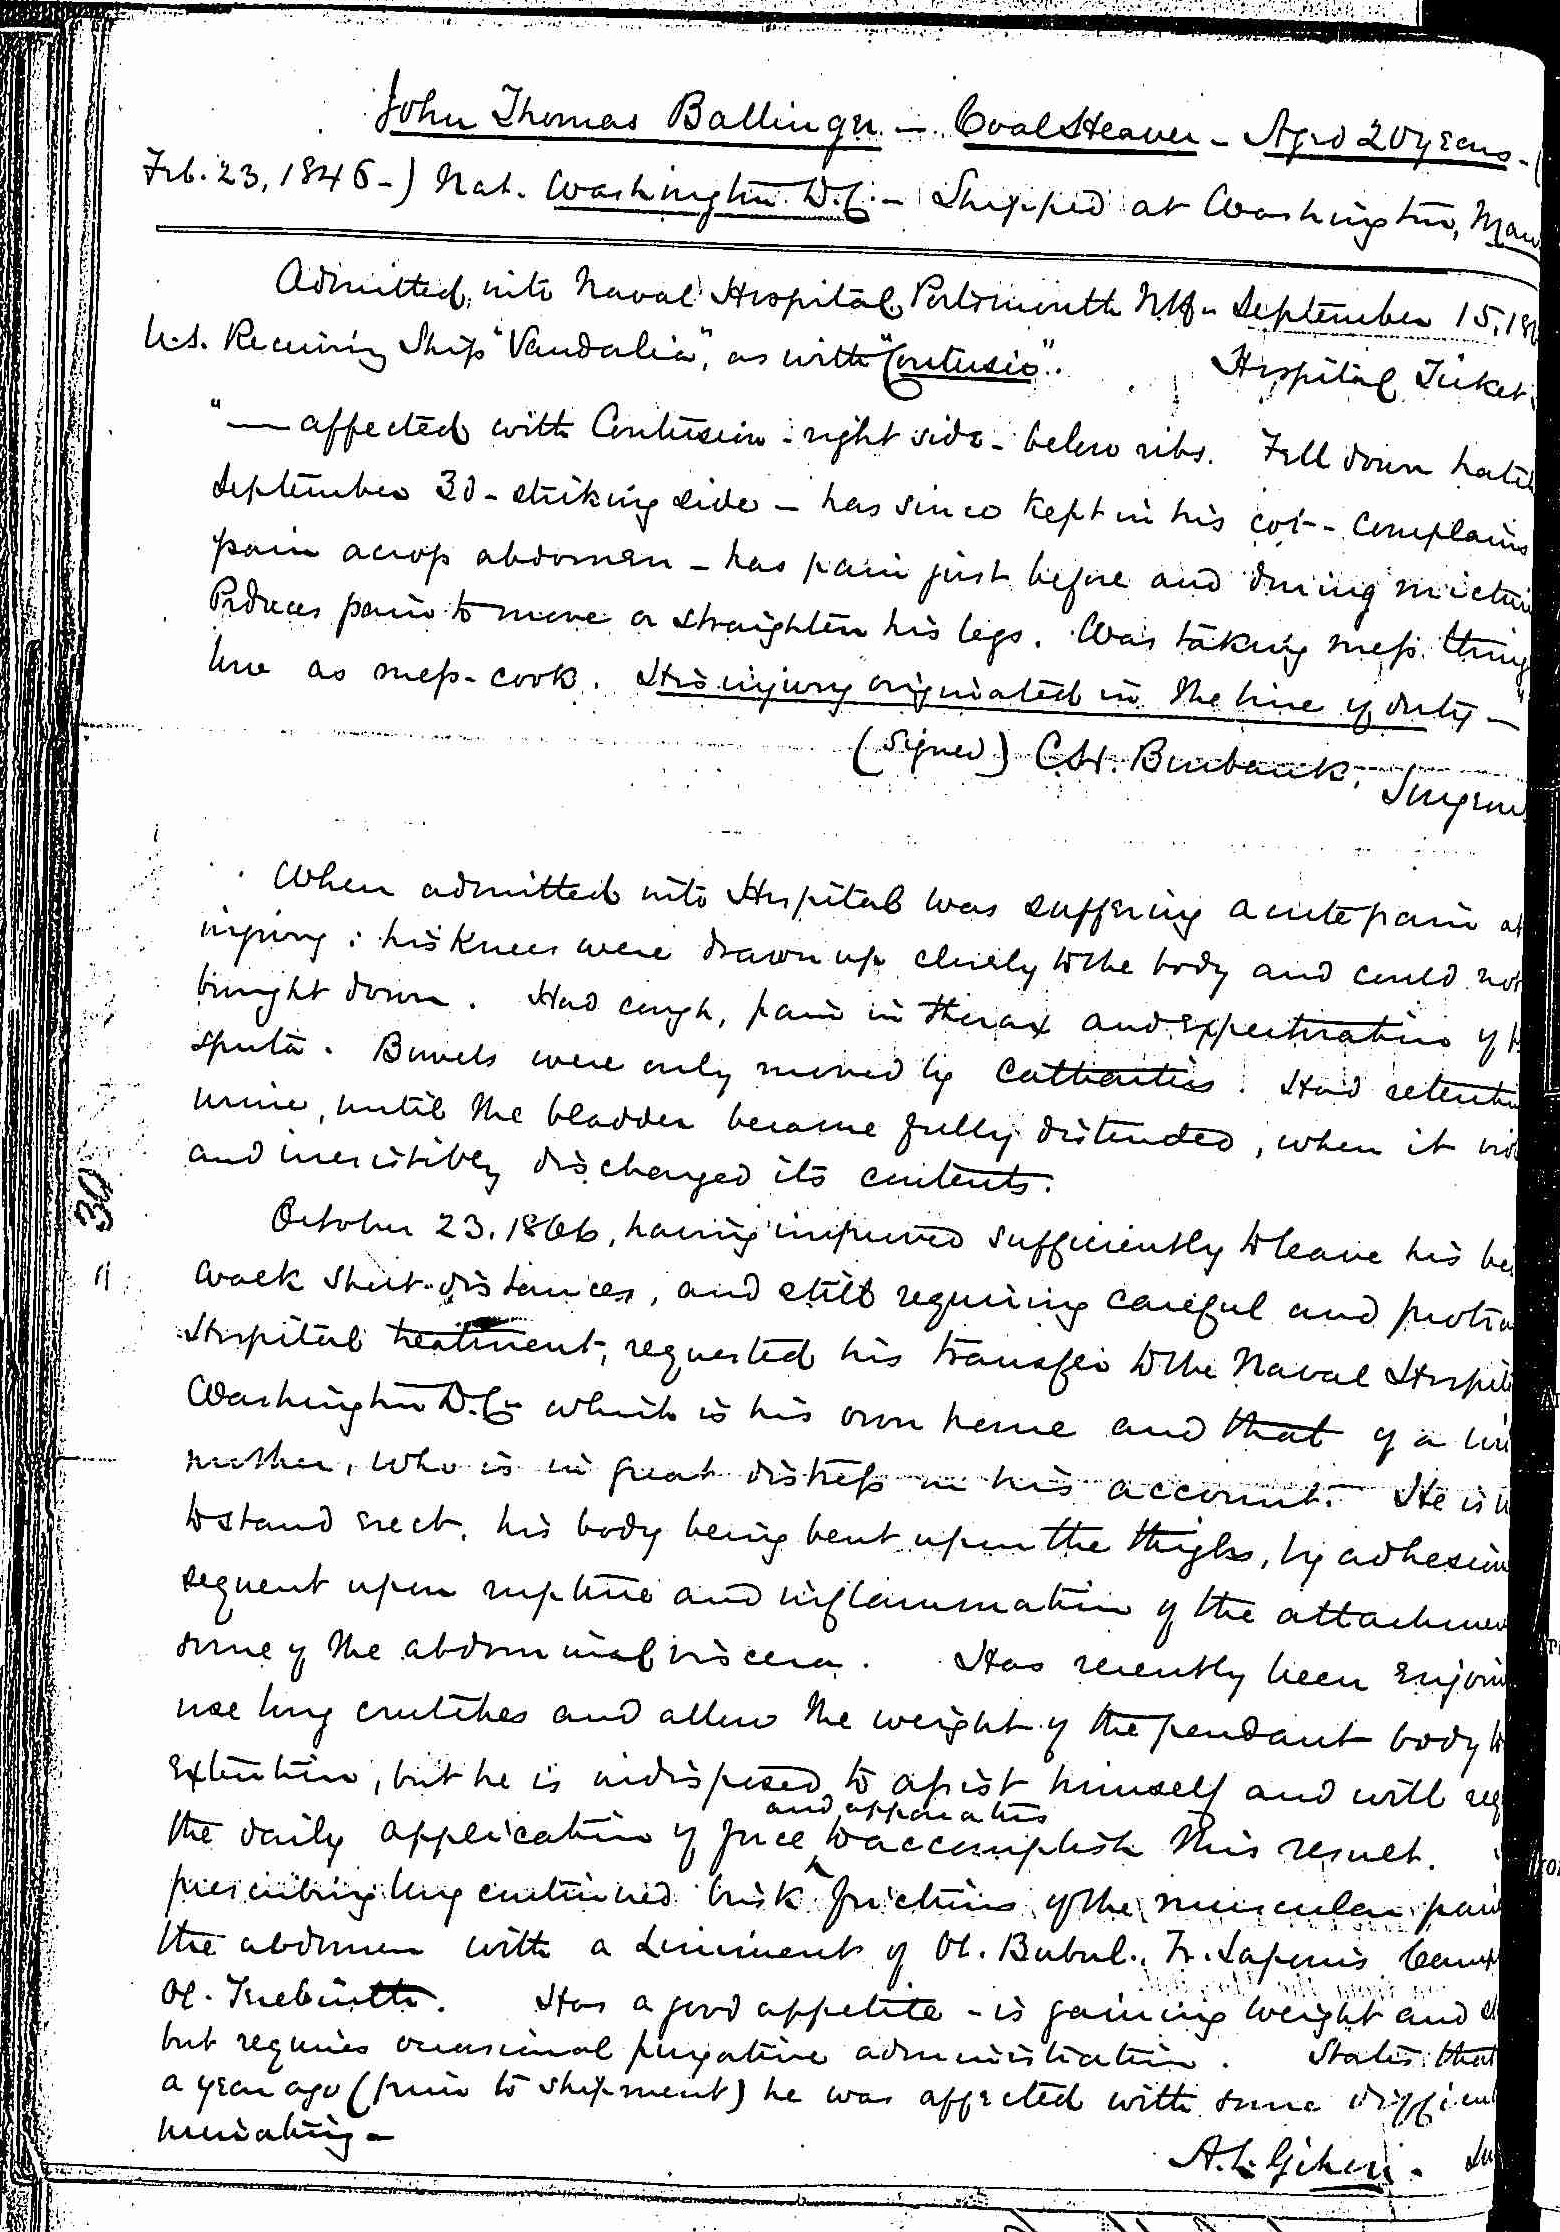 Entry for John Thomas Ballinger (page 2 of 2) in the log Hospital Tickets and Case Papers - Naval Hospital - Washington, D.C. - 1865-68